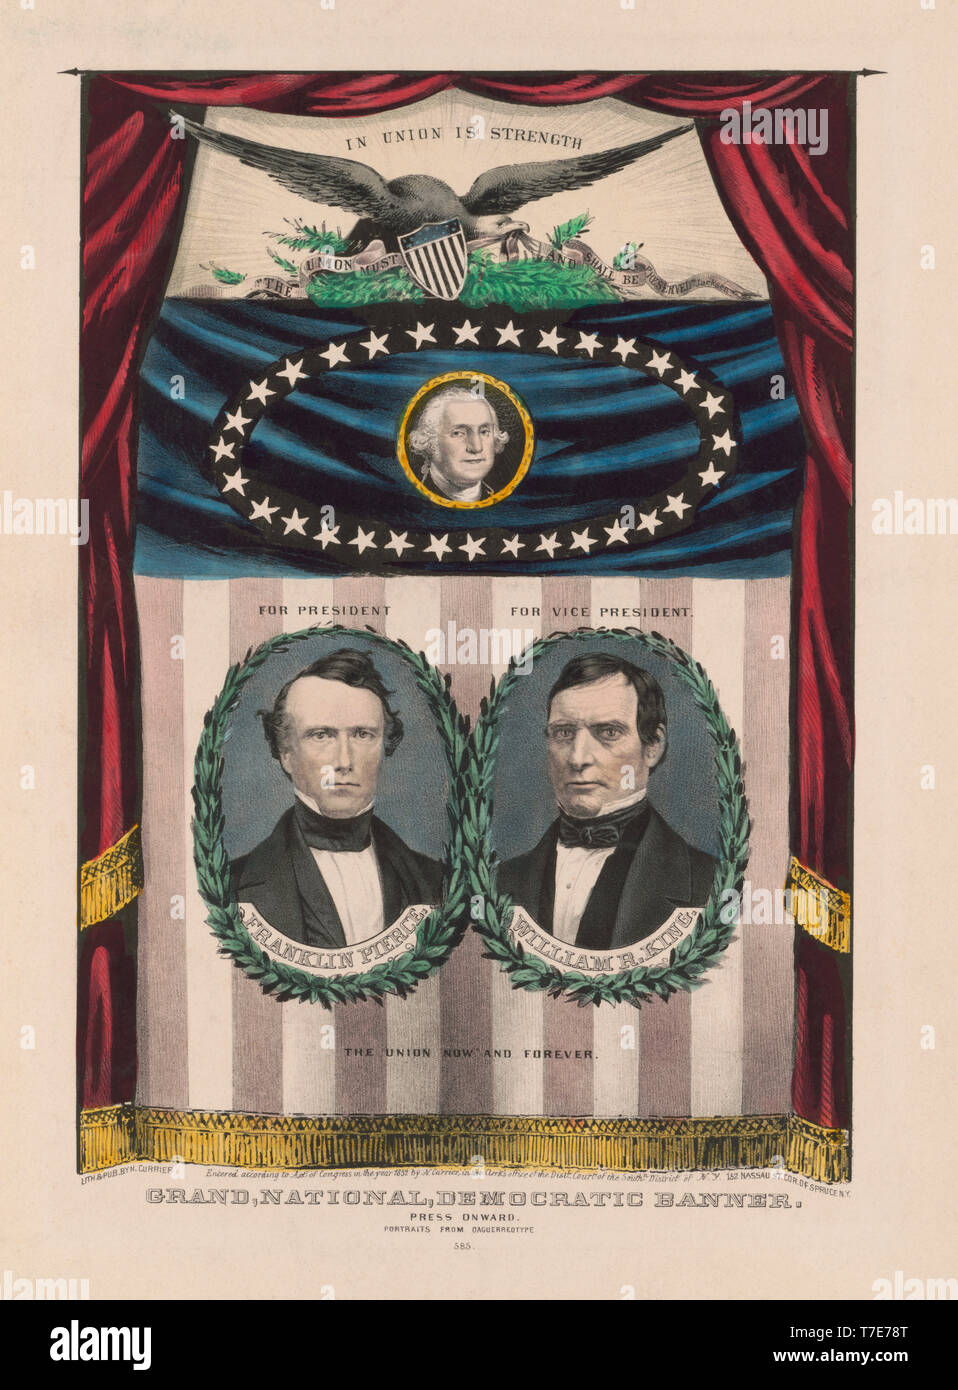 Presidential Campaign Banner, Bust Portraits for President, Franklin Pierce, President, For Vice President, William R. King, George Washington, Grand, National, Democratic Banner, Press Onward, Portraits from Daguerreotype, Lithograph by Nathaniel Currier, 1852 Stock Photo